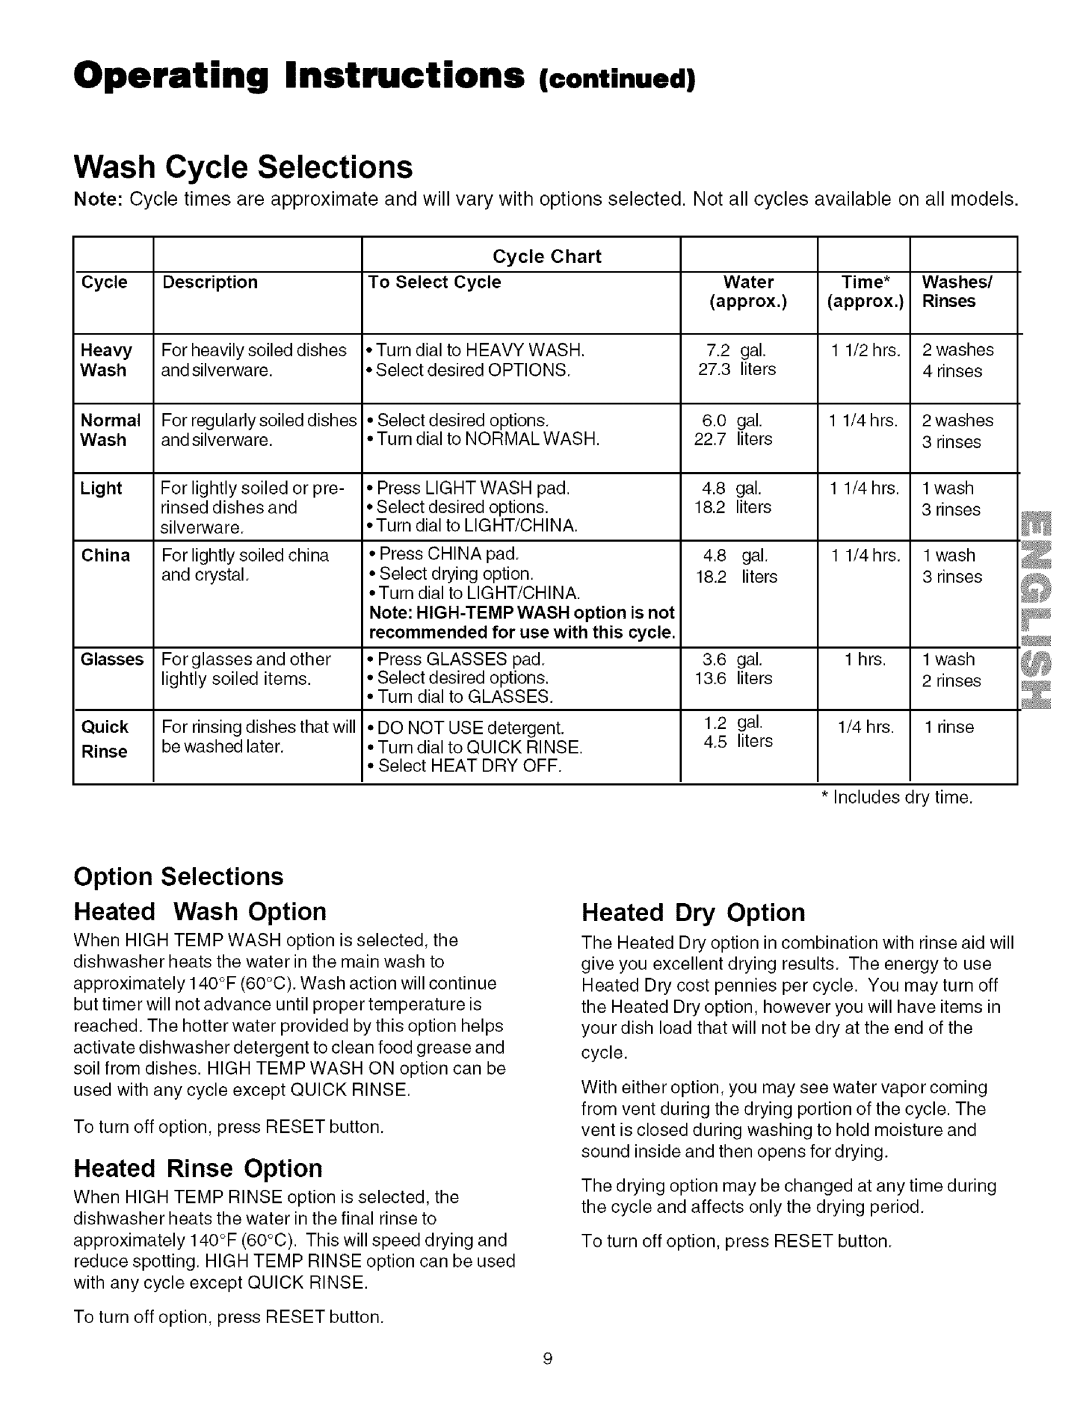 Kenmore 587.151600 manual Operating Instructions continued, Wash Cycle Selections, Option Selections Heated Wash Option 